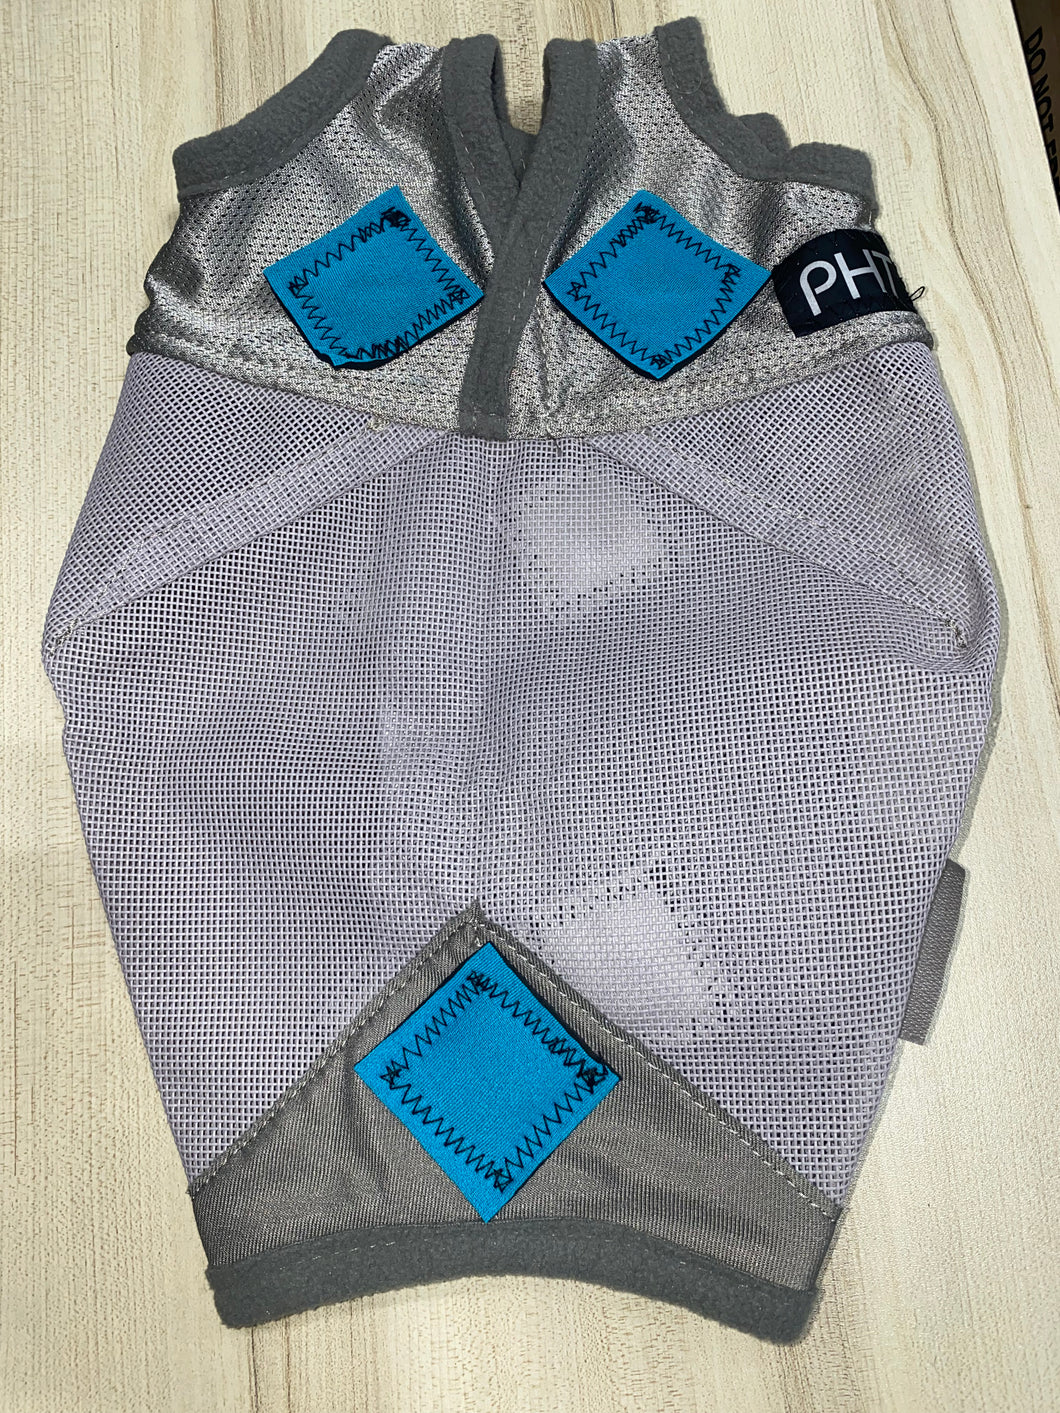 PHT MagnaCu Fly Mask